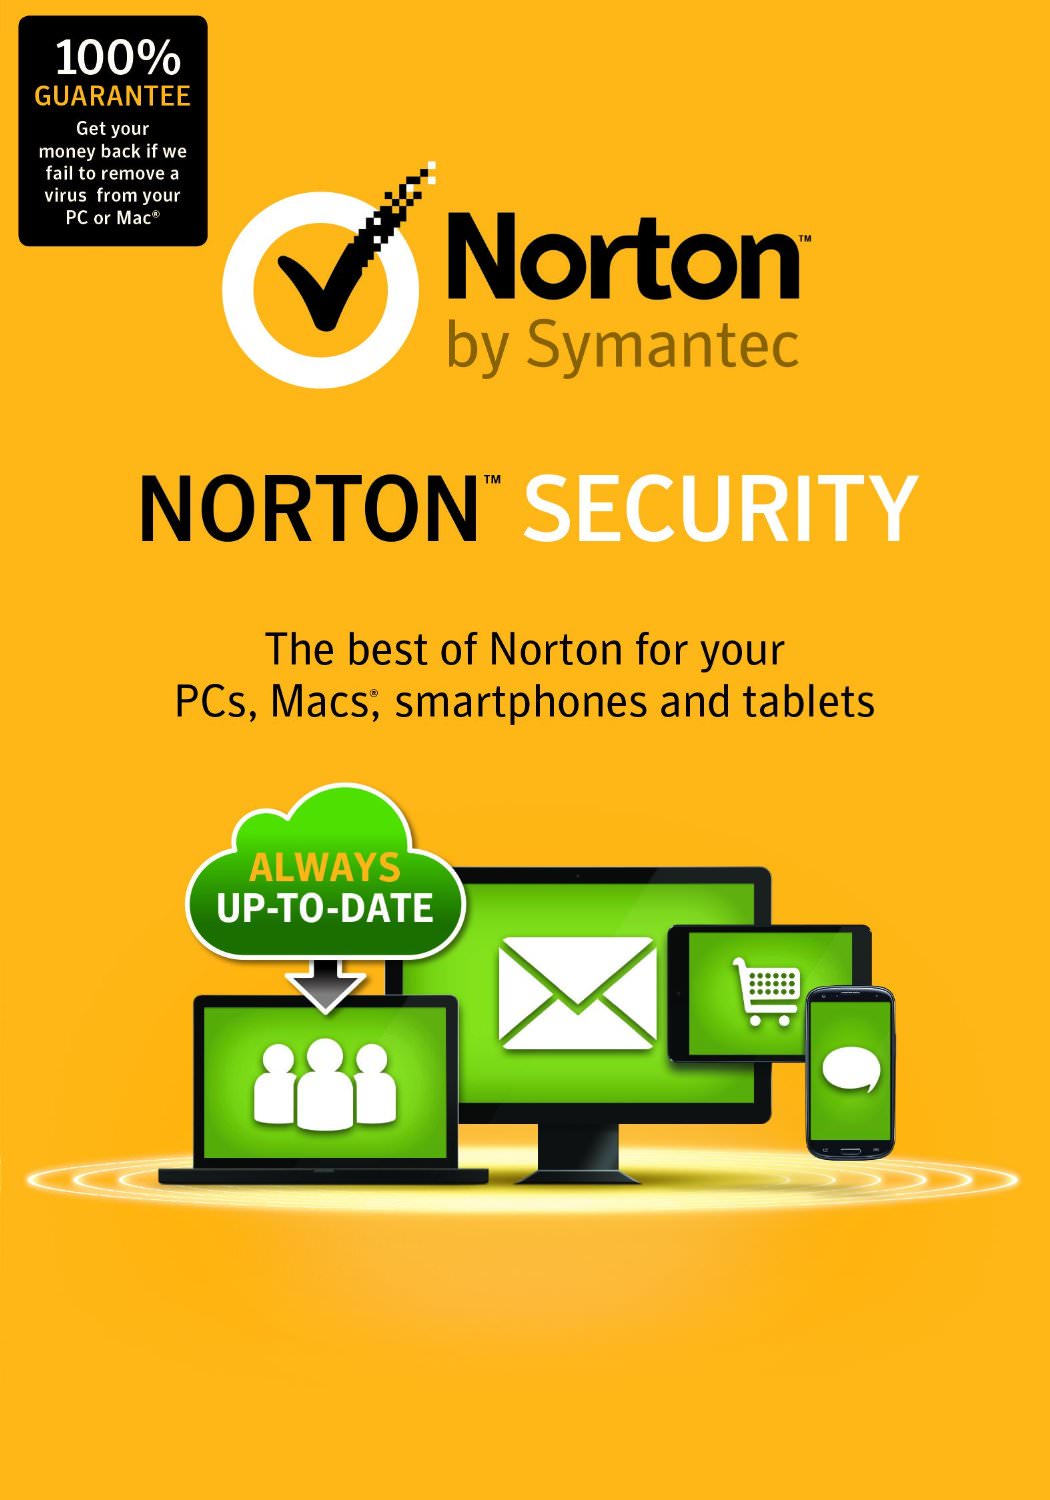 Download free norton antivirus software for laptop iphone 12 pro max software download